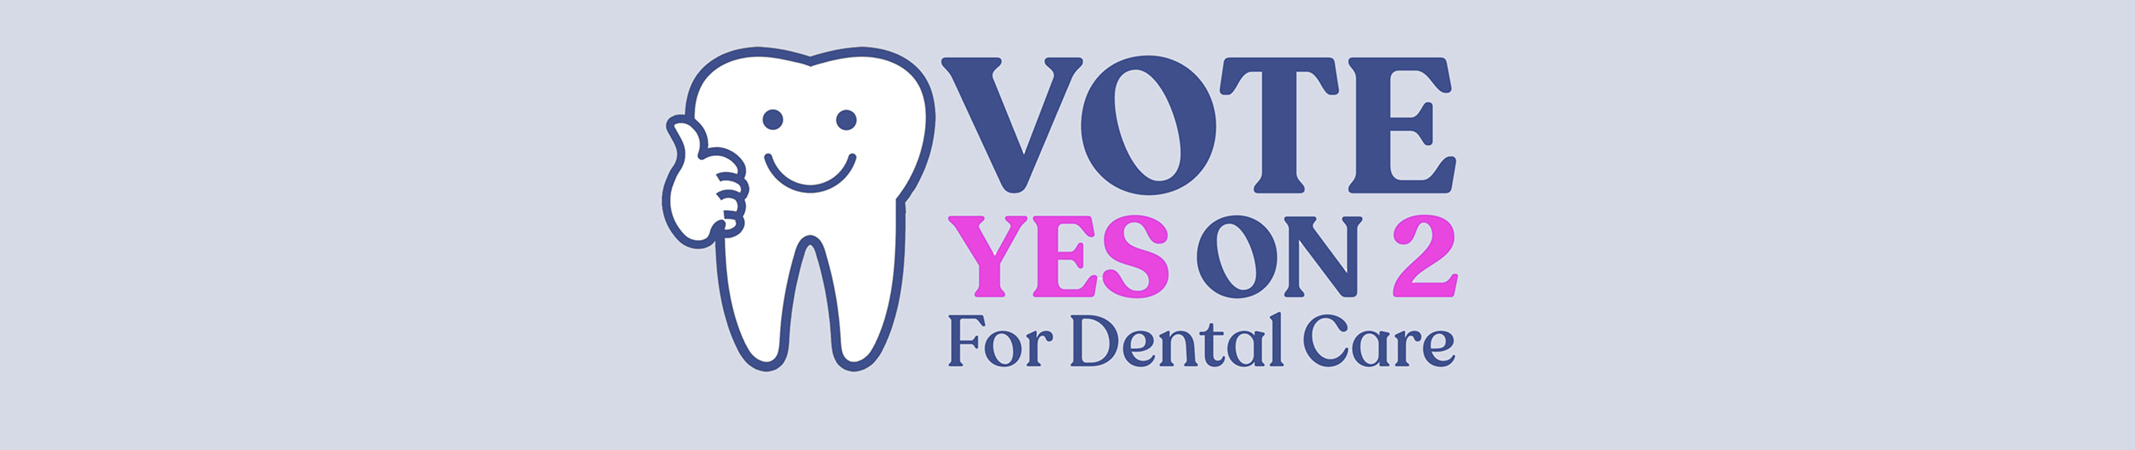 Vote Yes on 2 For Dental Care